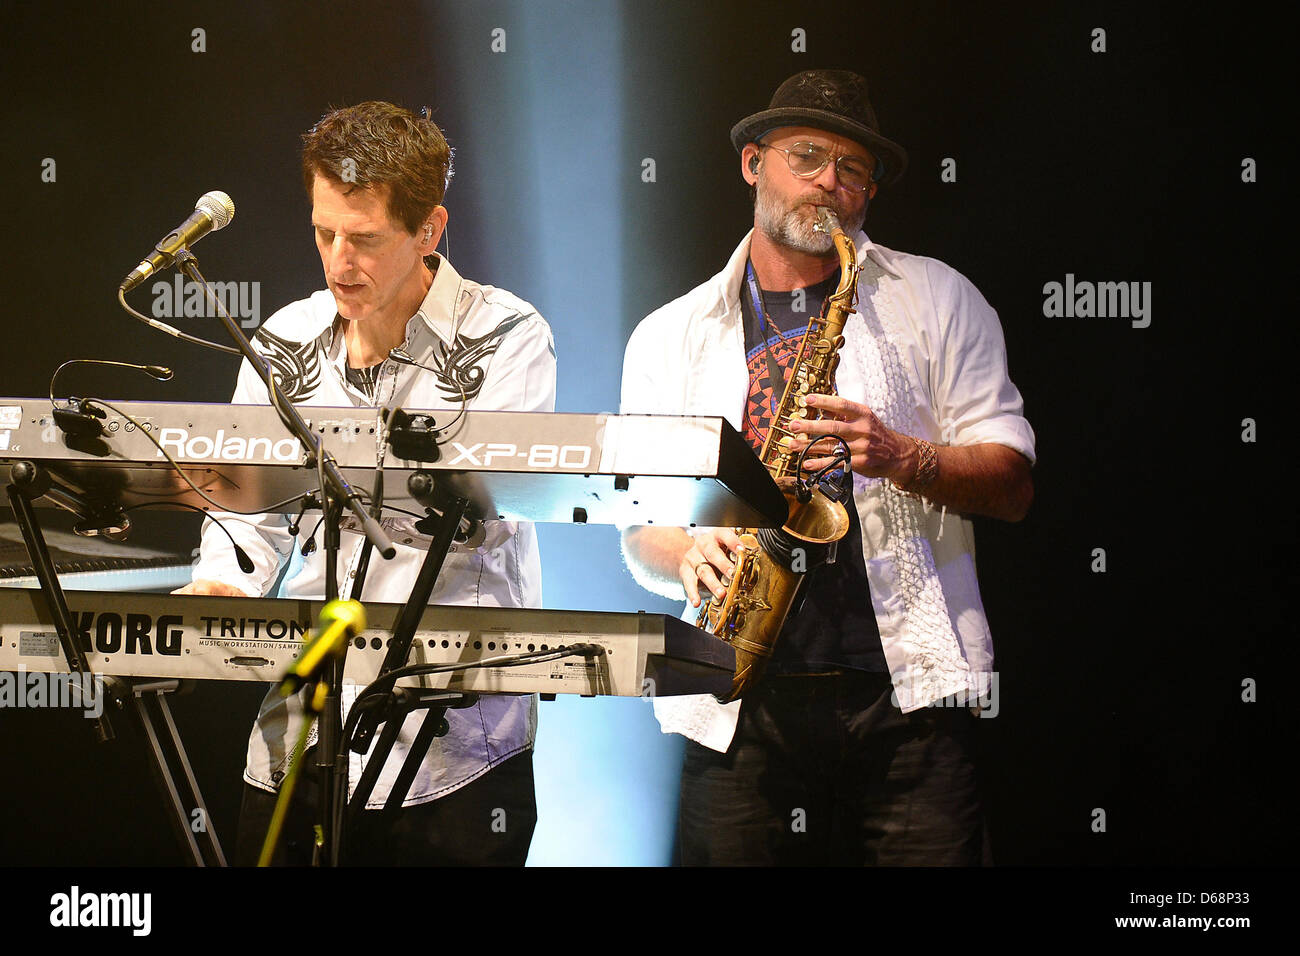 Tom Brooks (L) and Todd Cooper perform on stage during The Alan Parsons Live Project tour 2012 at Circus Krone in Munich, Germany, 19 July 2012. Photo: Revierfoto Stock Photo